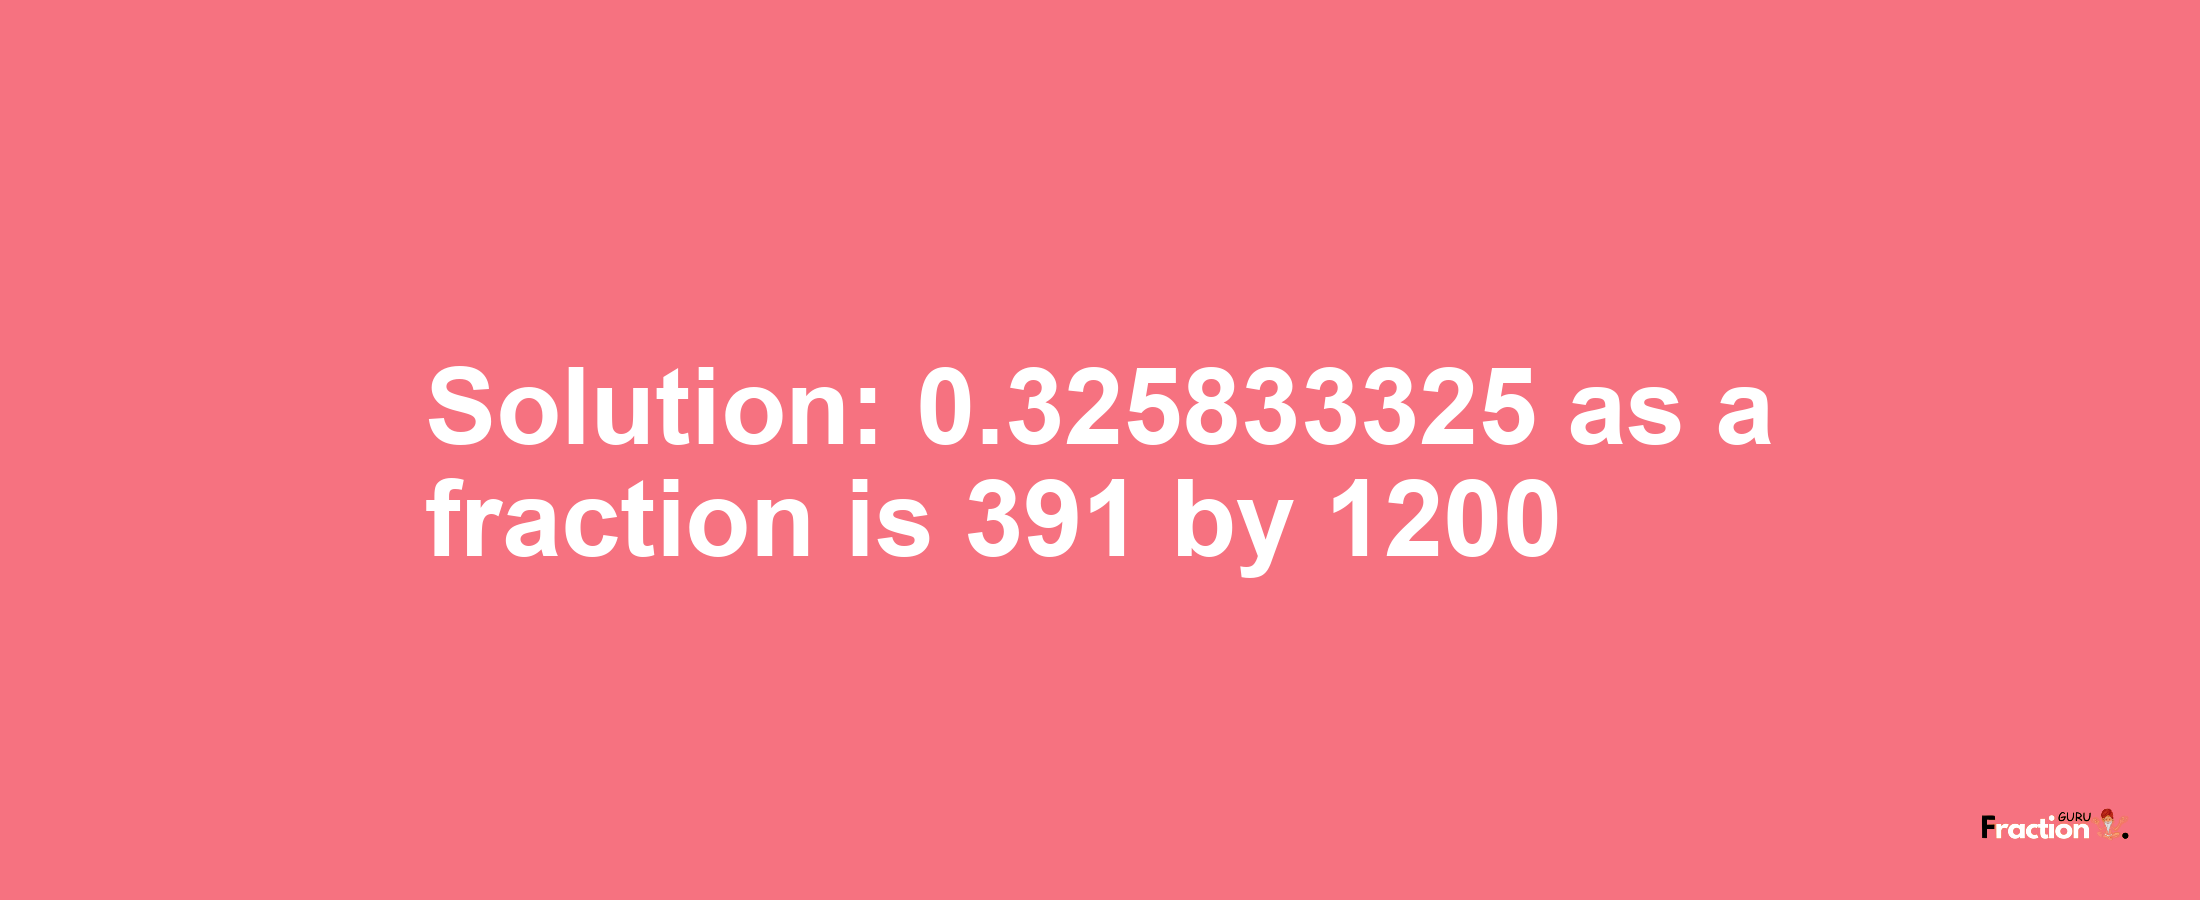 Solution:0.325833325 as a fraction is 391/1200